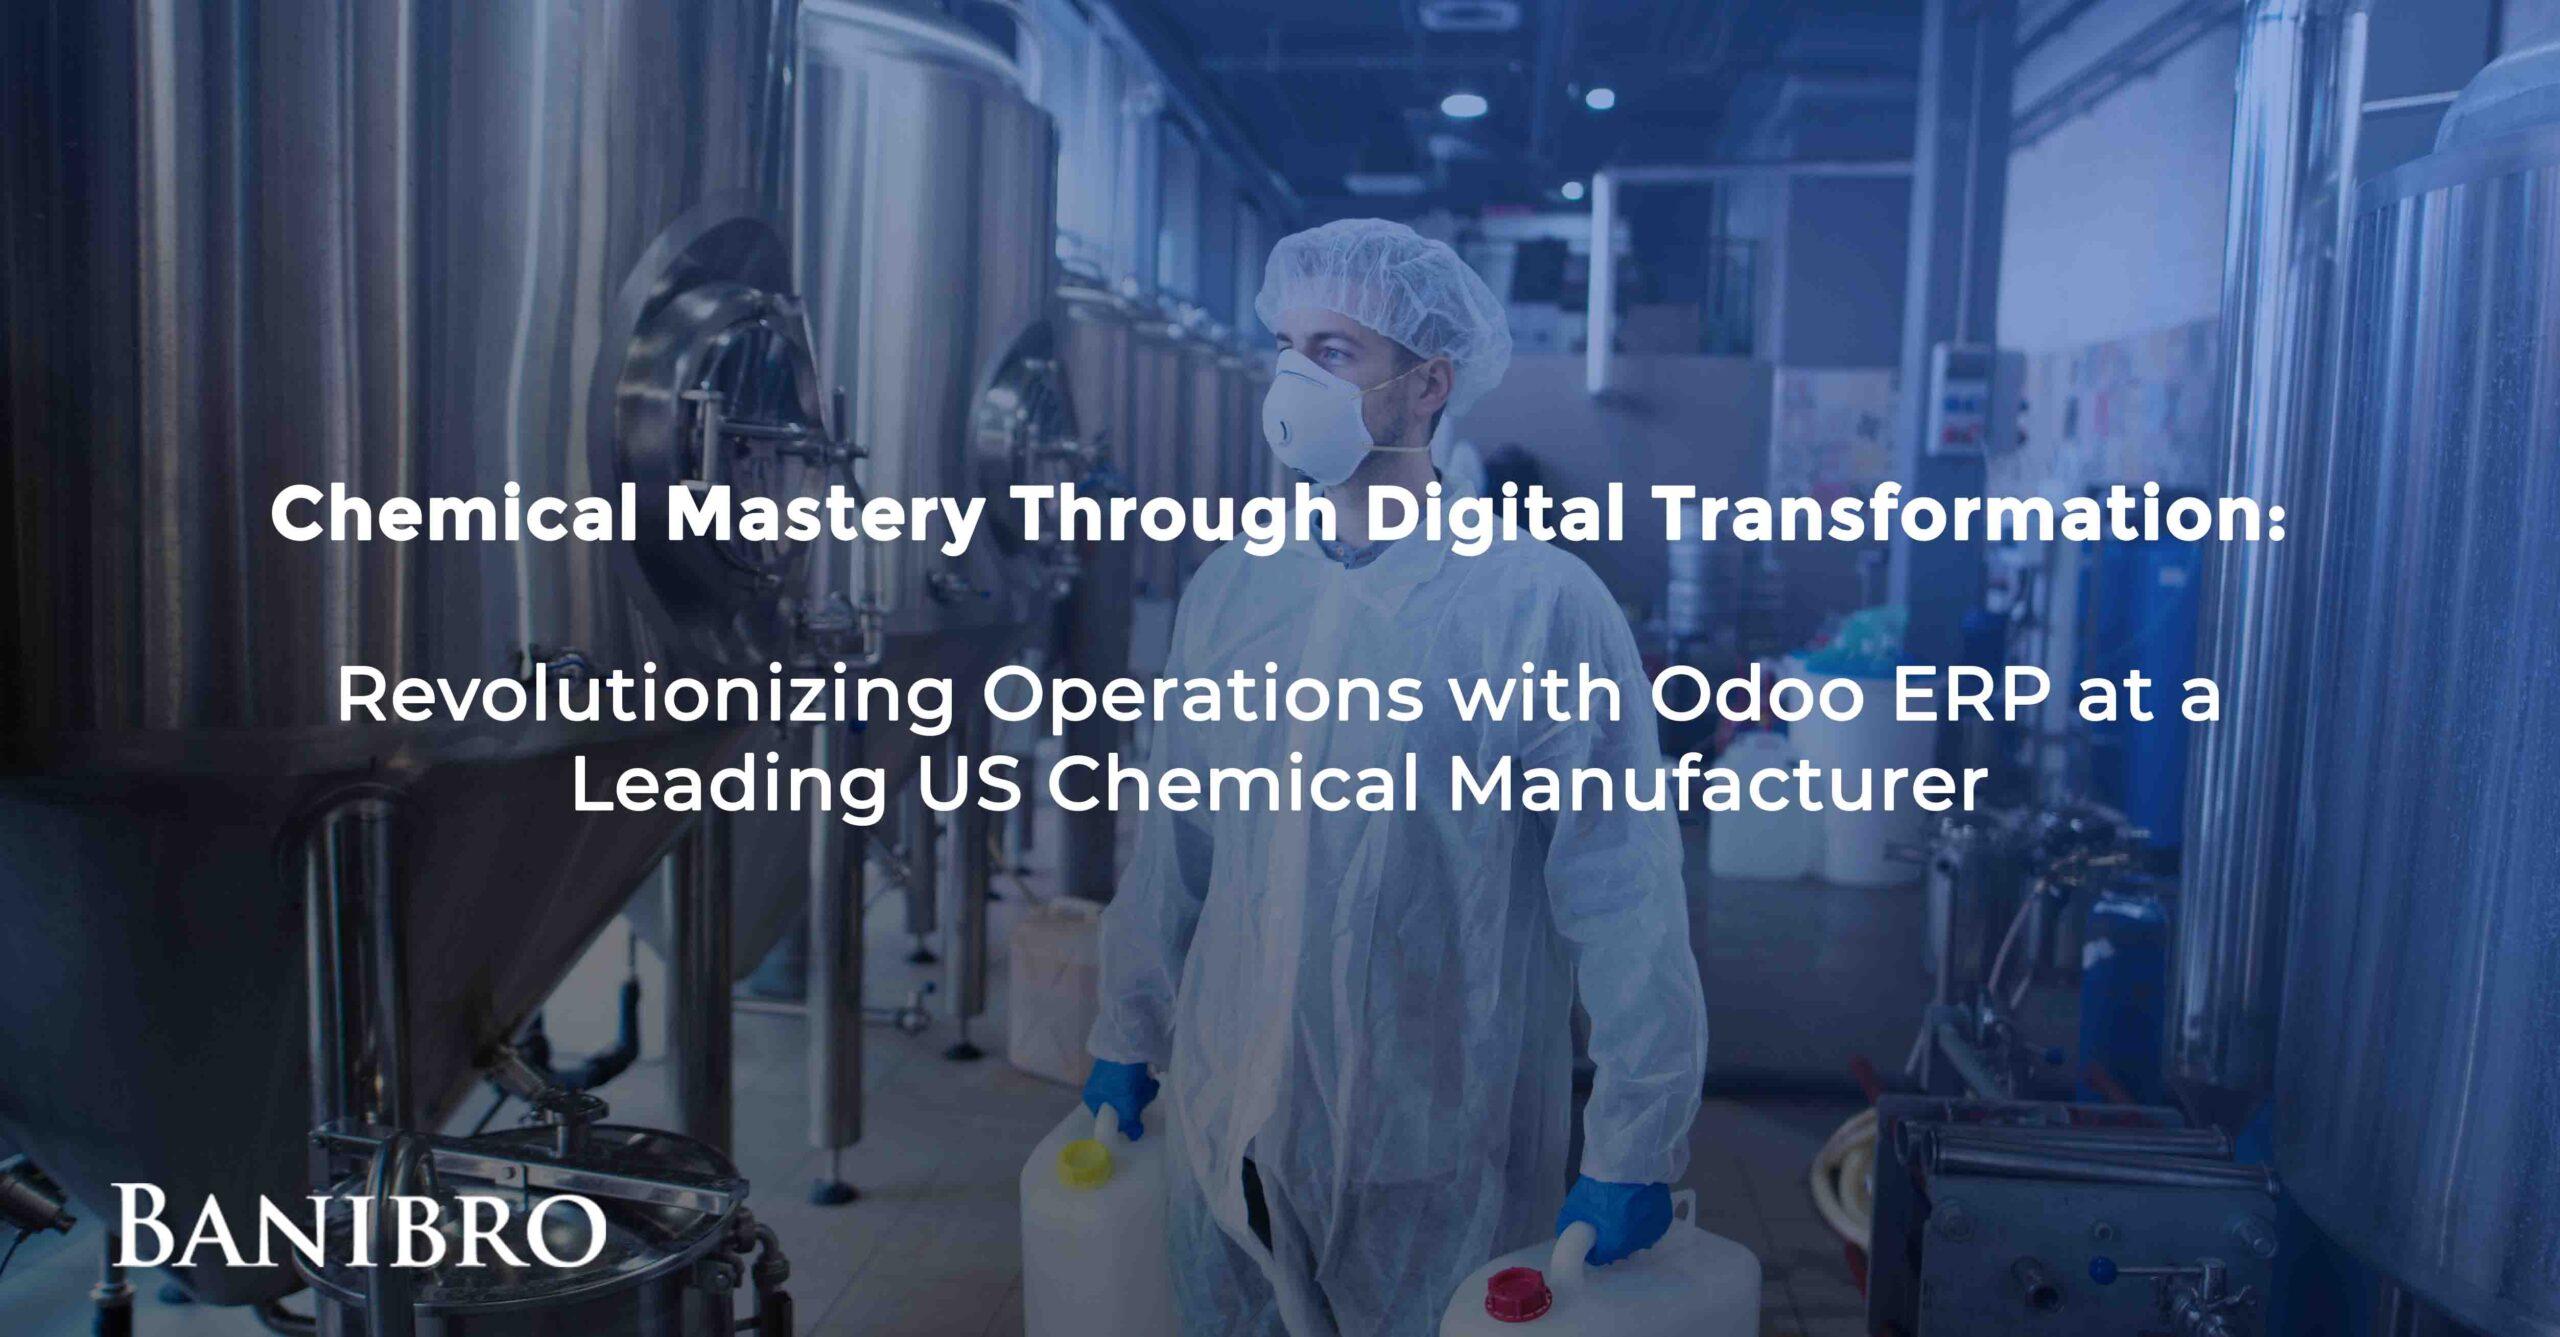 Chemical Mastery Through Digital Transformation : Revolutionizing Operations with Odoo ERP at a Leading US Chemical Manufacturer